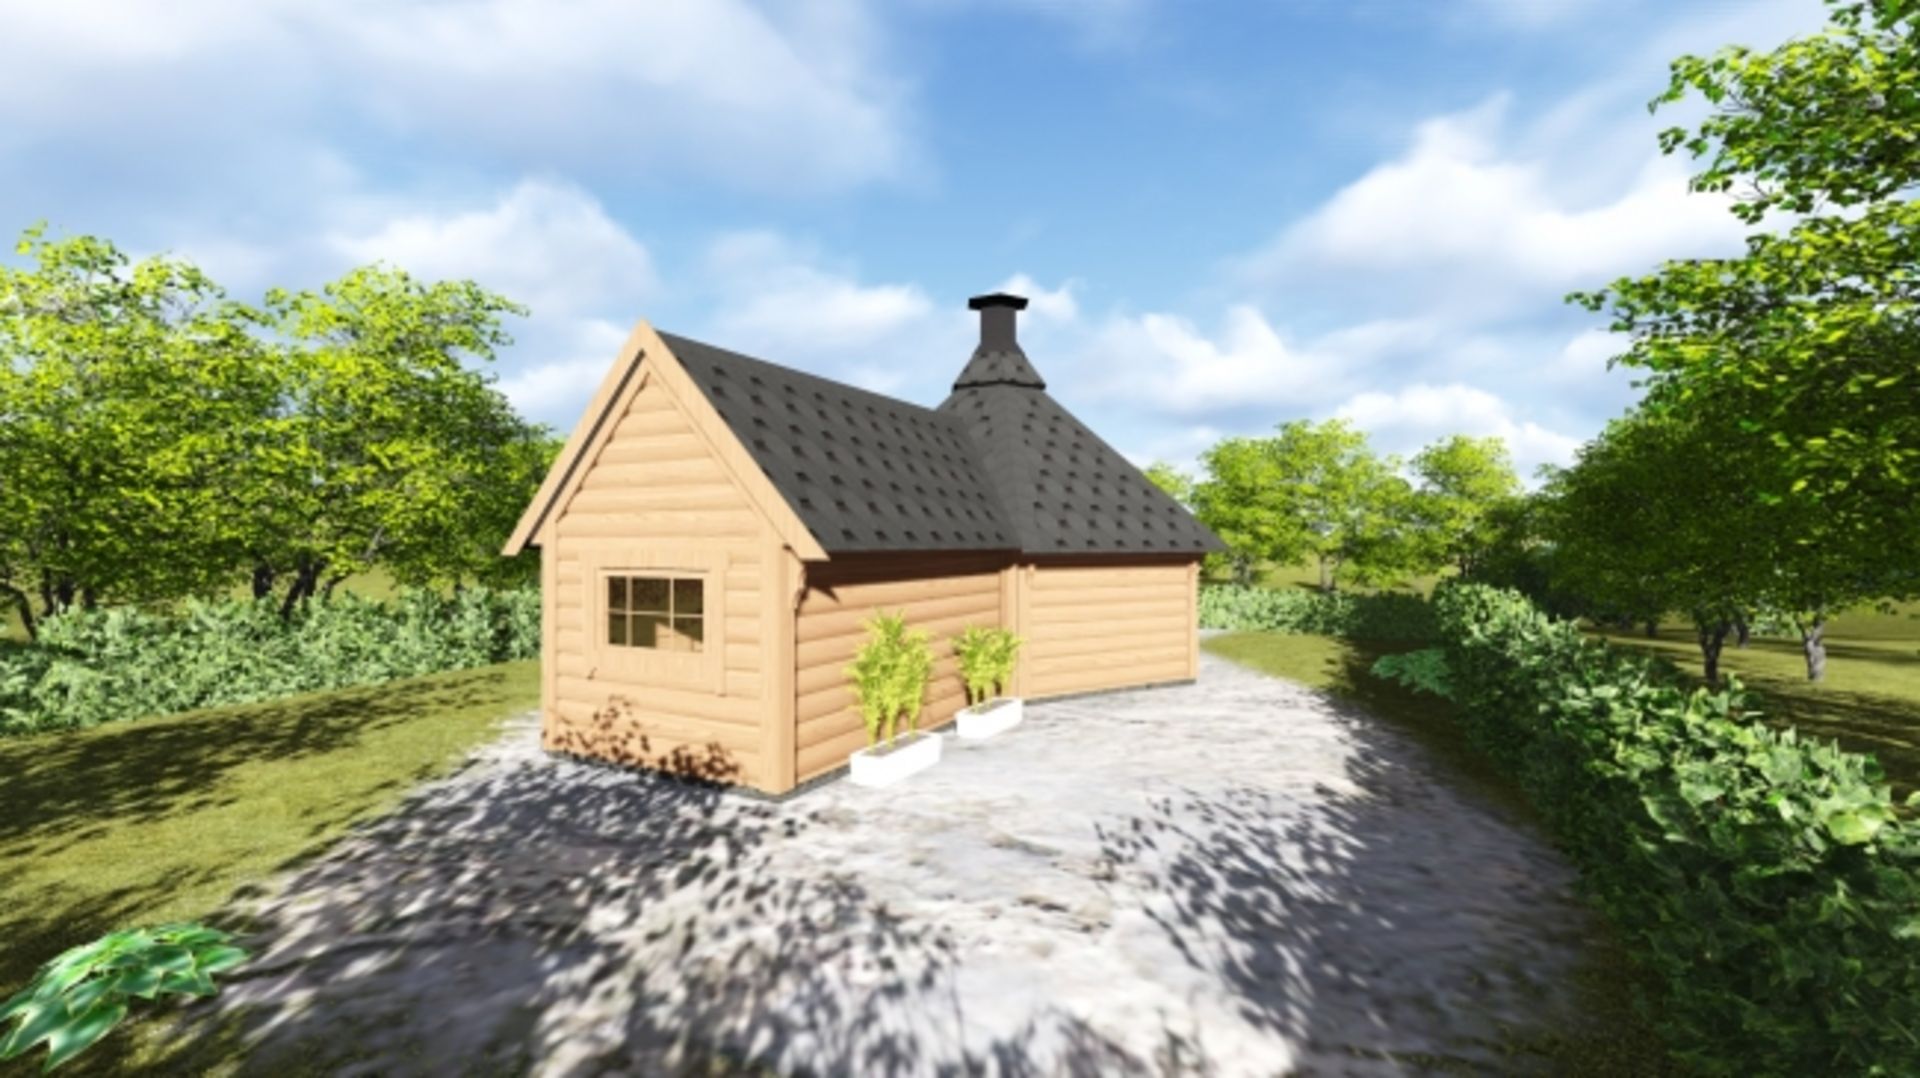 V Brand New 9.2m sq 6 Corner Spruce Grill Cabin With Sauna Extension - 9KW Electric Heater - - Image 3 of 4